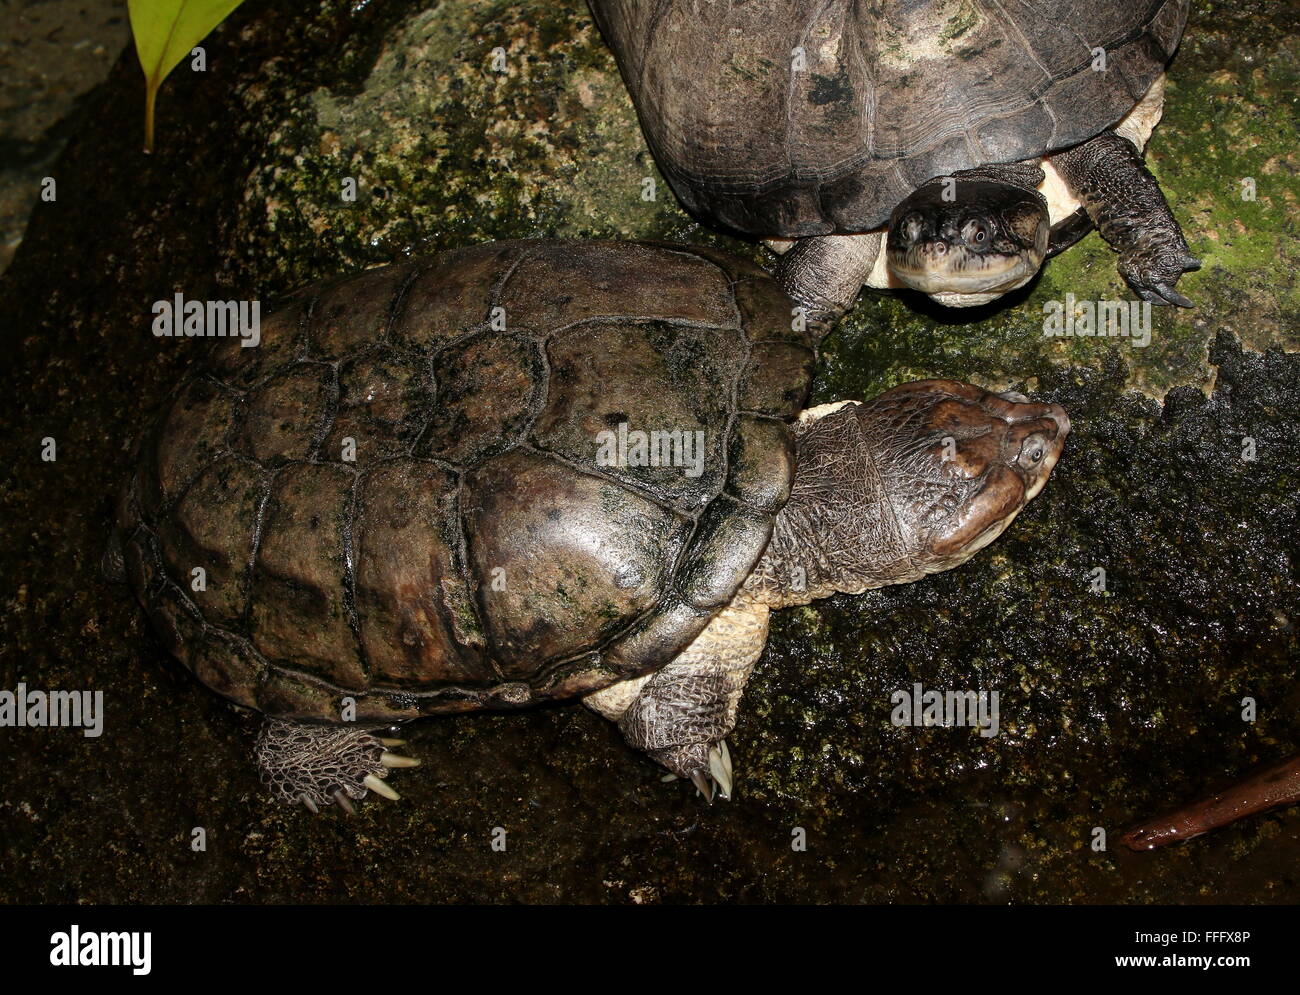 In front an African helmeted turtle (Pelomedusa subrufa), in the back the head of a West African mud turtle (Pelusios castaneus) Stock Photo